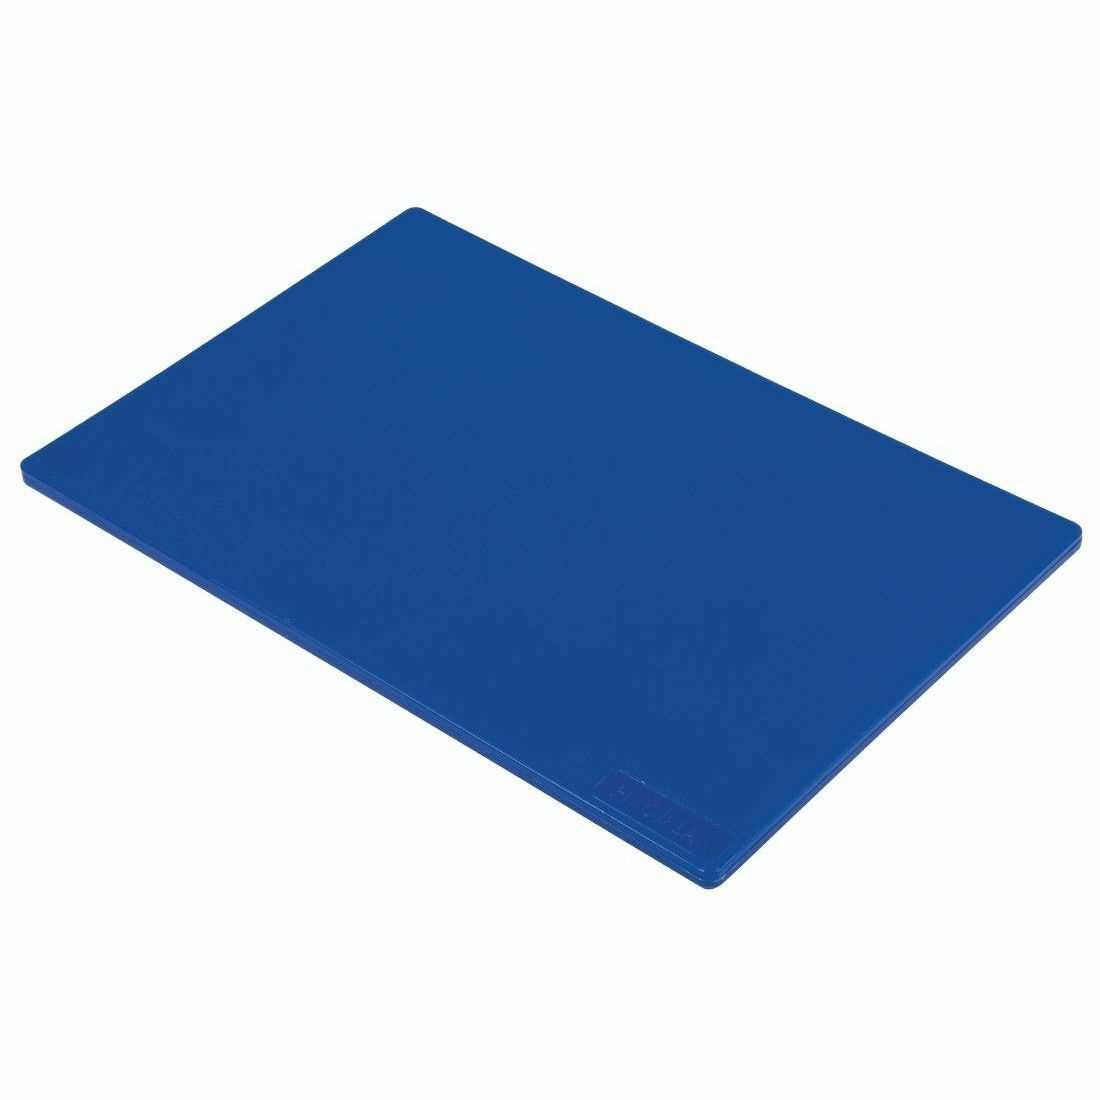 Blue Commercial Kitchen Chopping Board Colour Coded Hygiene Catering Food Cutting Set